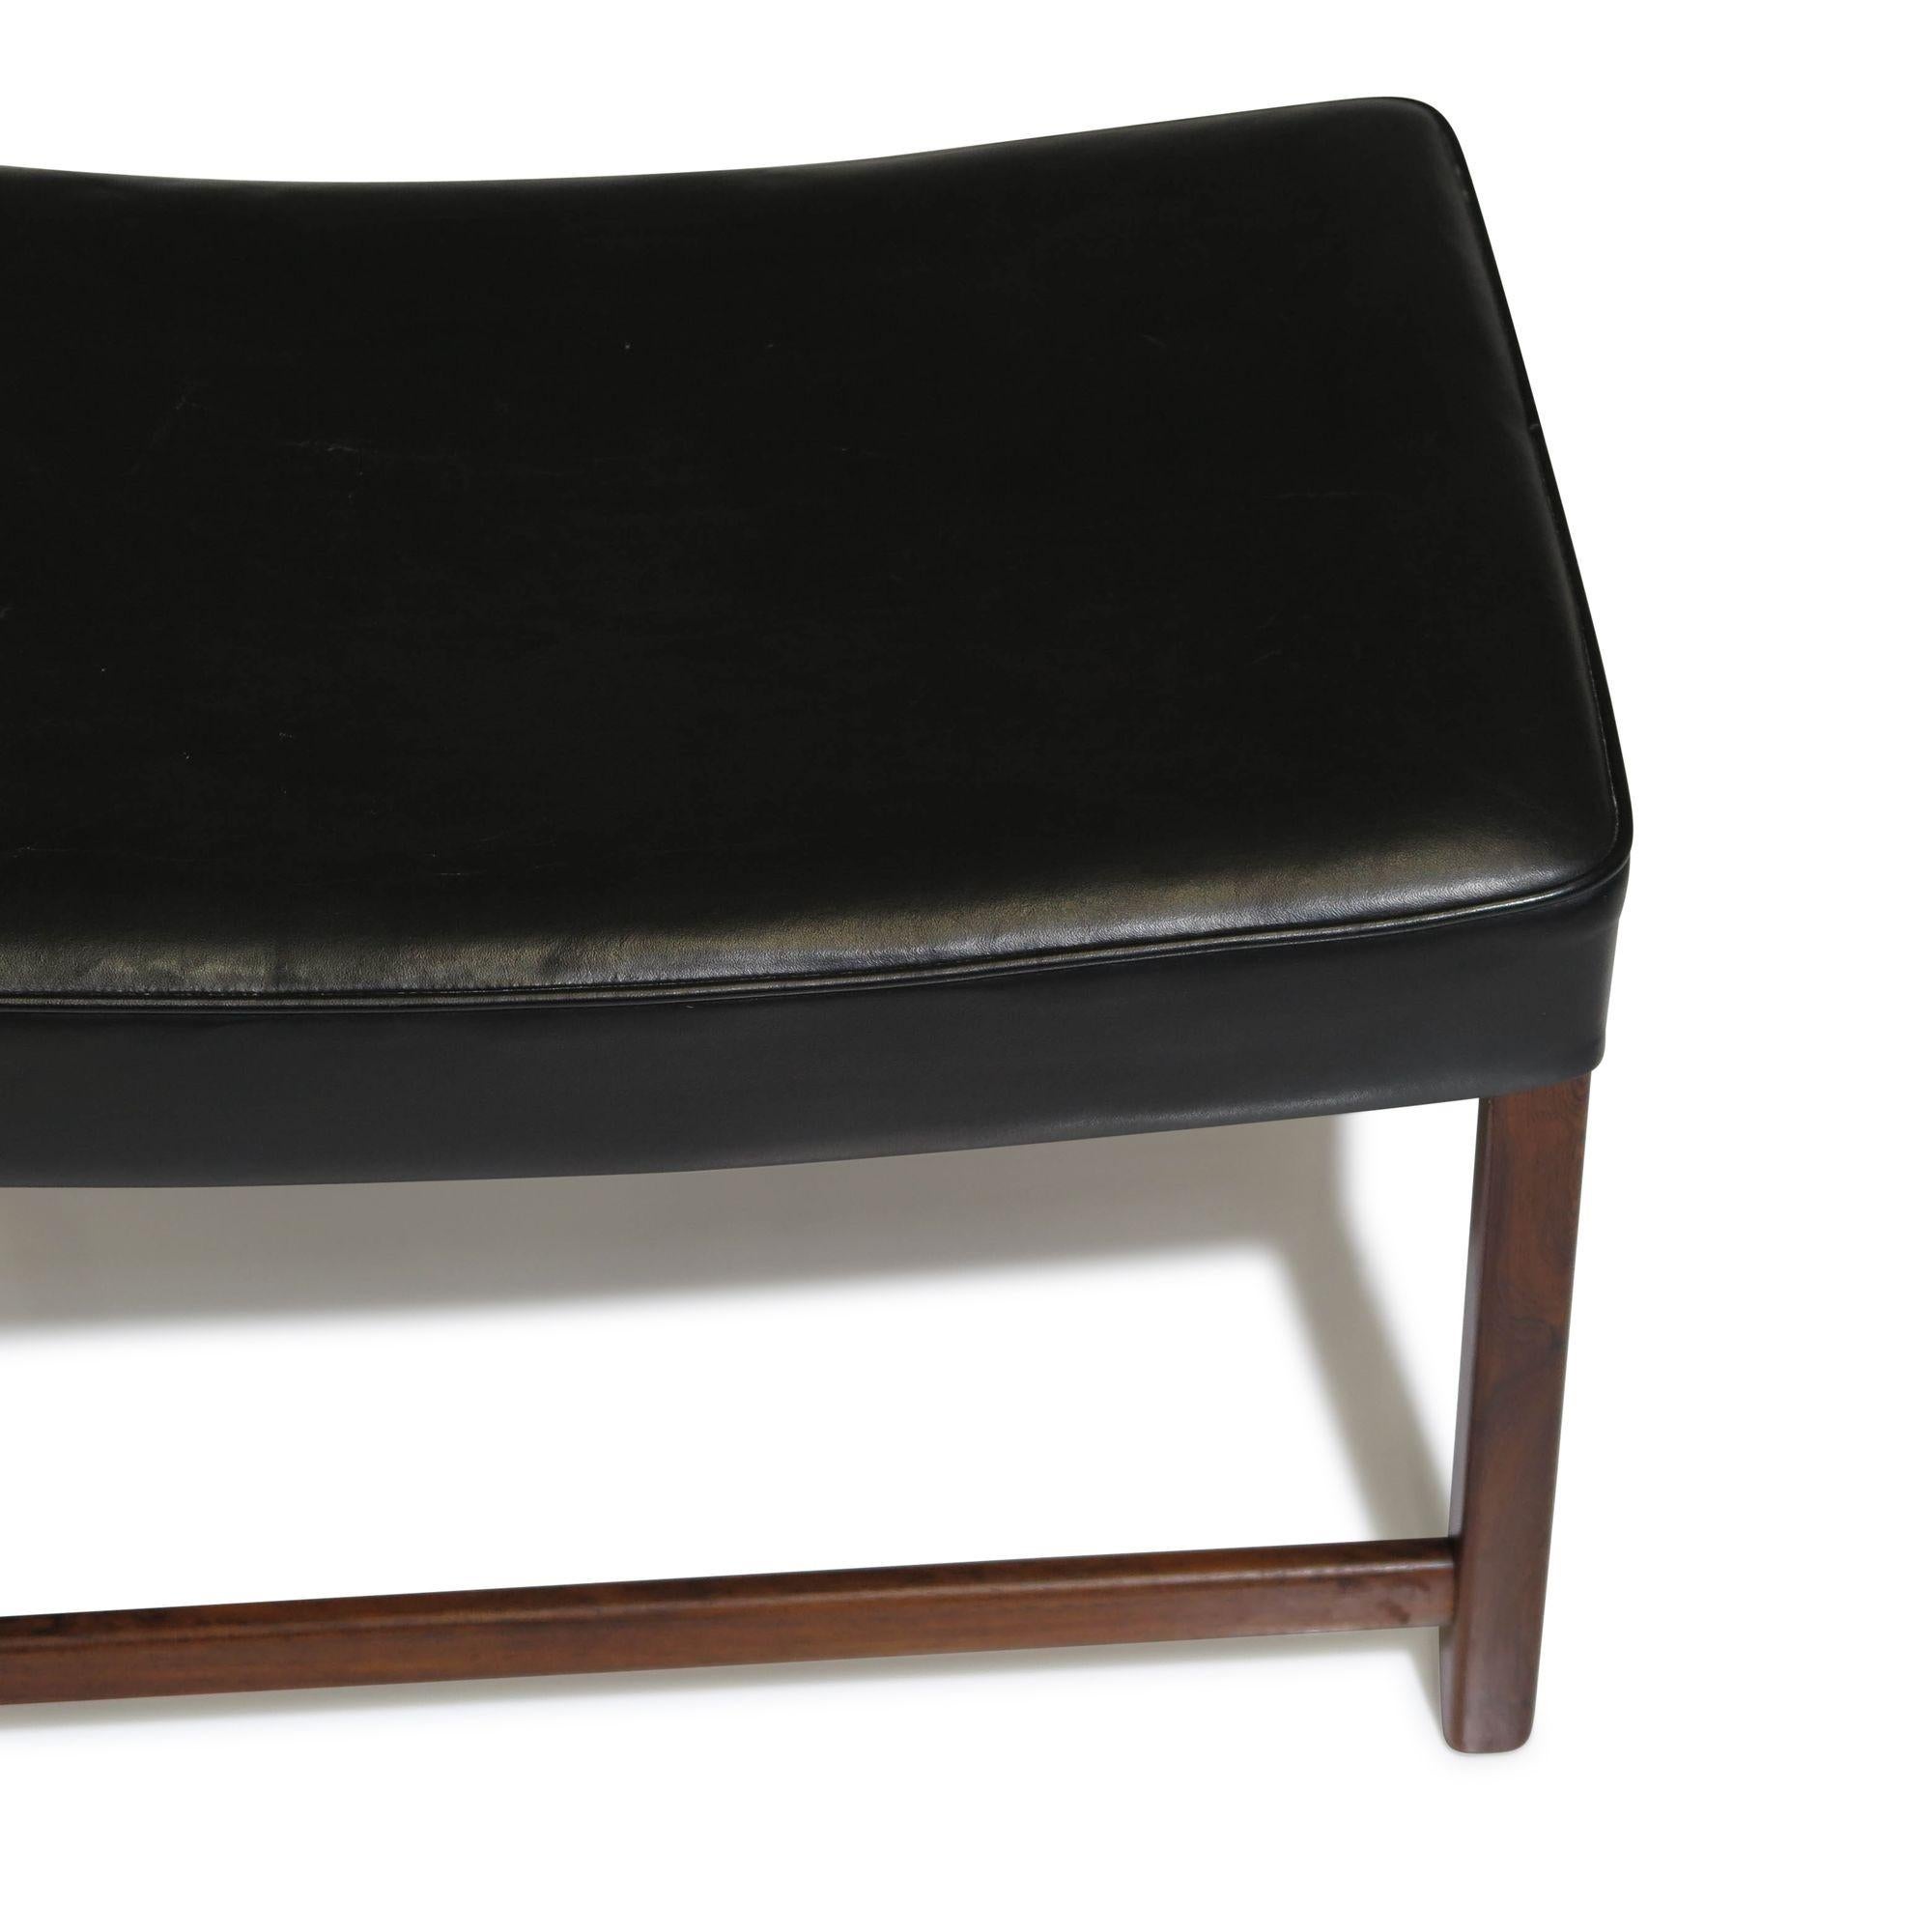 Fredrik Kayser Danish Rosewood Ottoman or Bench in Black Leather In Good Condition For Sale In Oakland, CA